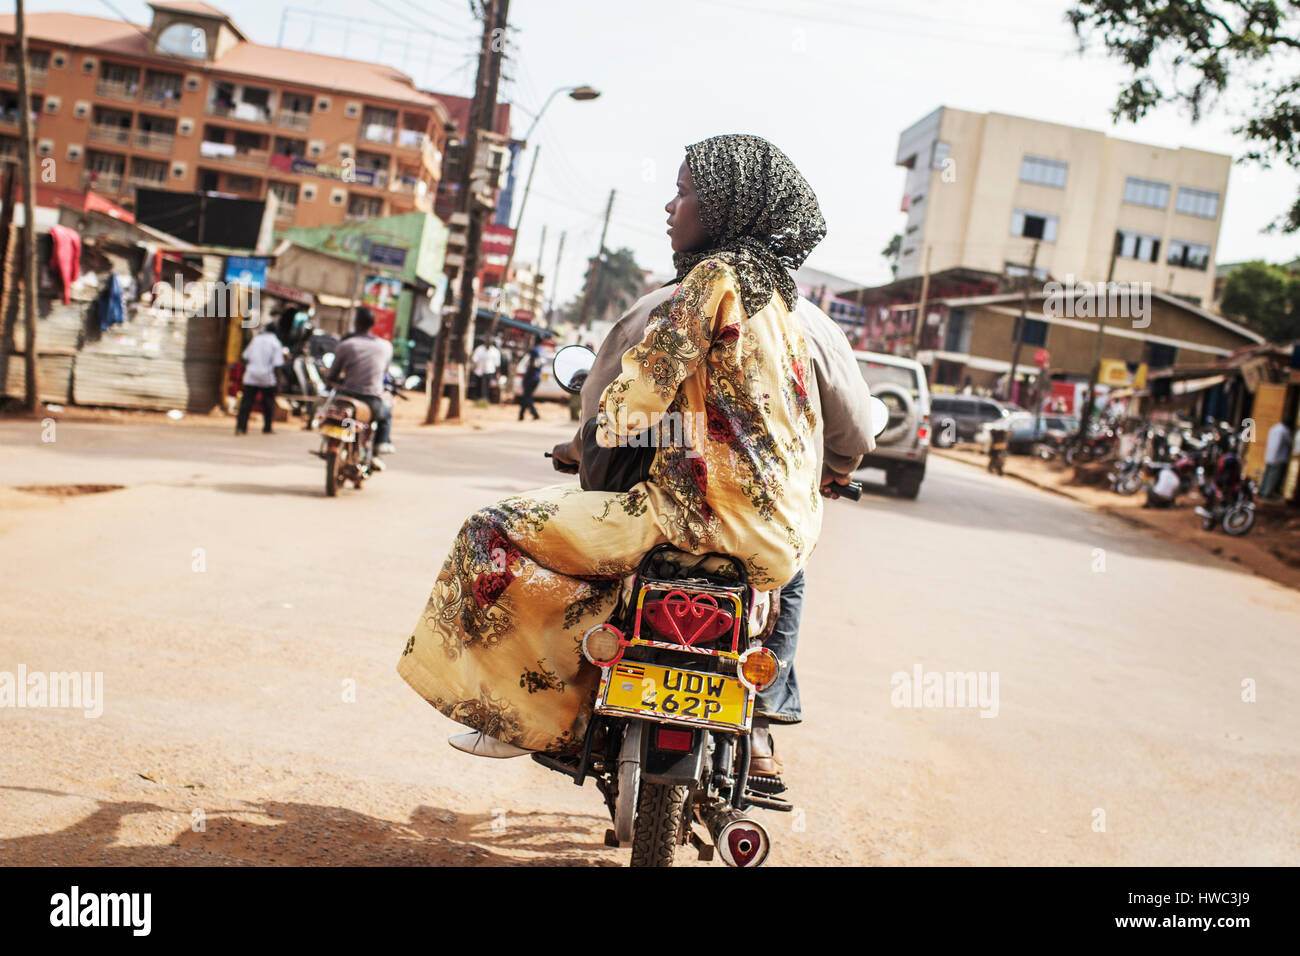 Boda-bodas, or motorcycle taxis, is one of the most regular transport forms in the most of Eastern Africa. A ride in central Kampala costs around 2000-4000 Uganda shillings, which is around $0.75-1.5. Stock Photo